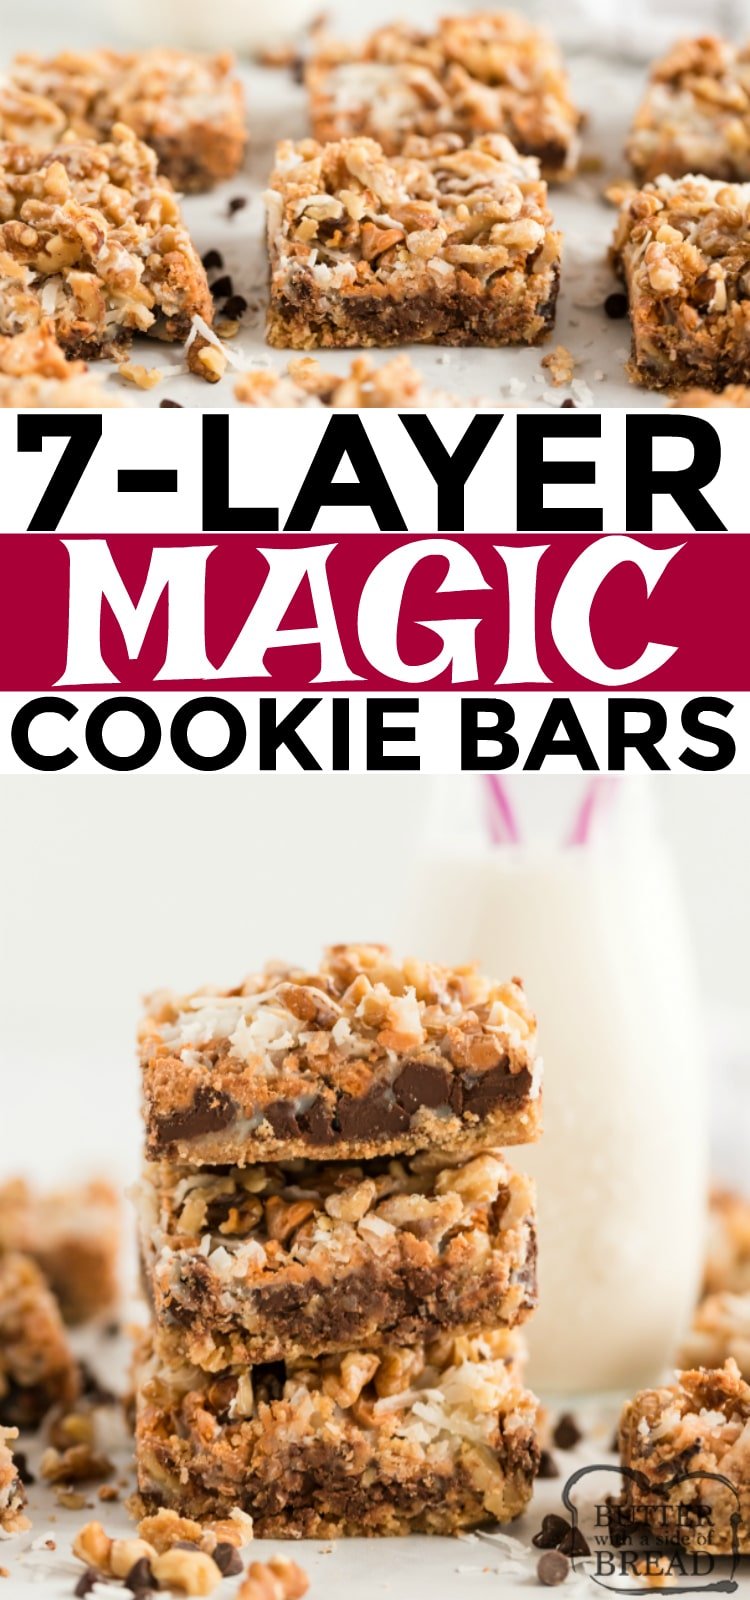 7 Layer Magic Cookie Bars made with graham cracker crumbs, chocolate chips, butterscotch chips, coconut, walnuts and sweetened condensed milk. 7 Layer Bars are a favorite holiday treat that everyone loves!